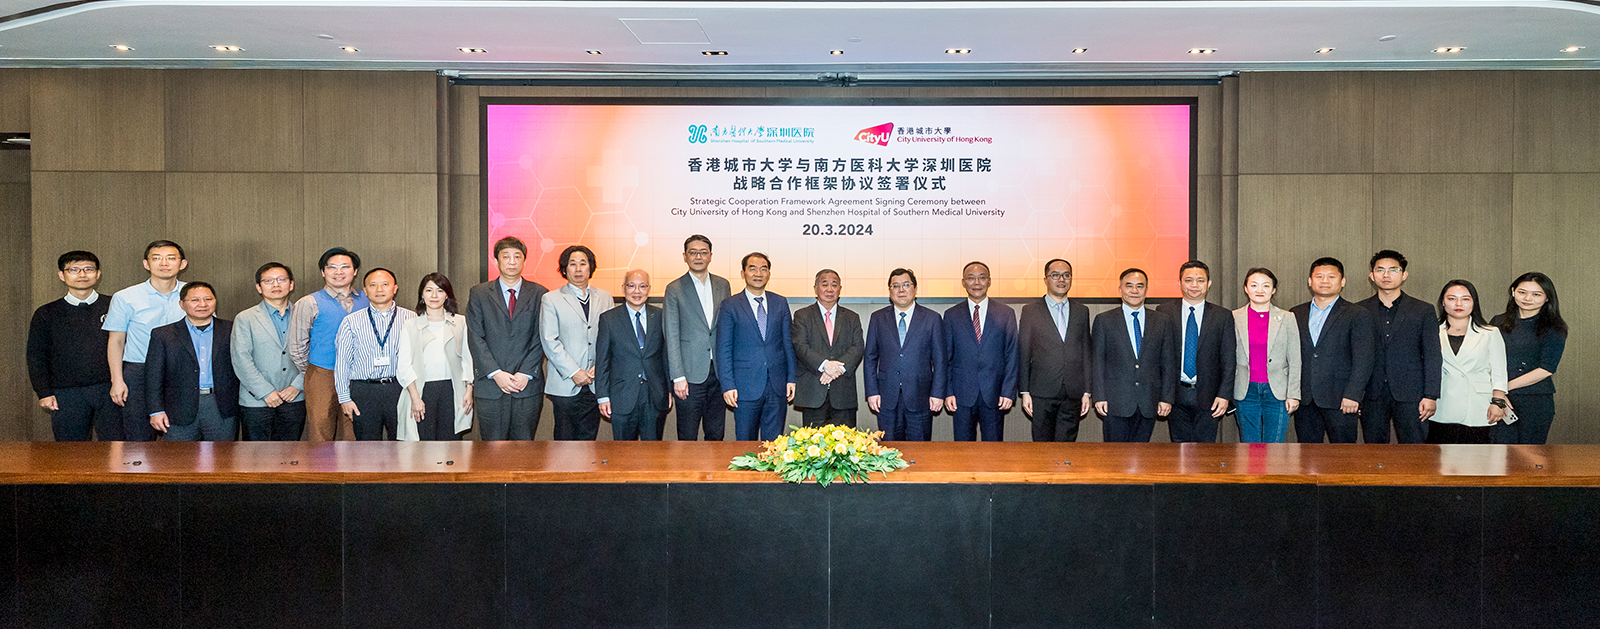 CityUHK senior management and faculty receives the delegation from SMU and the Qianhai Administration Bureau of Shenzhen Municipality